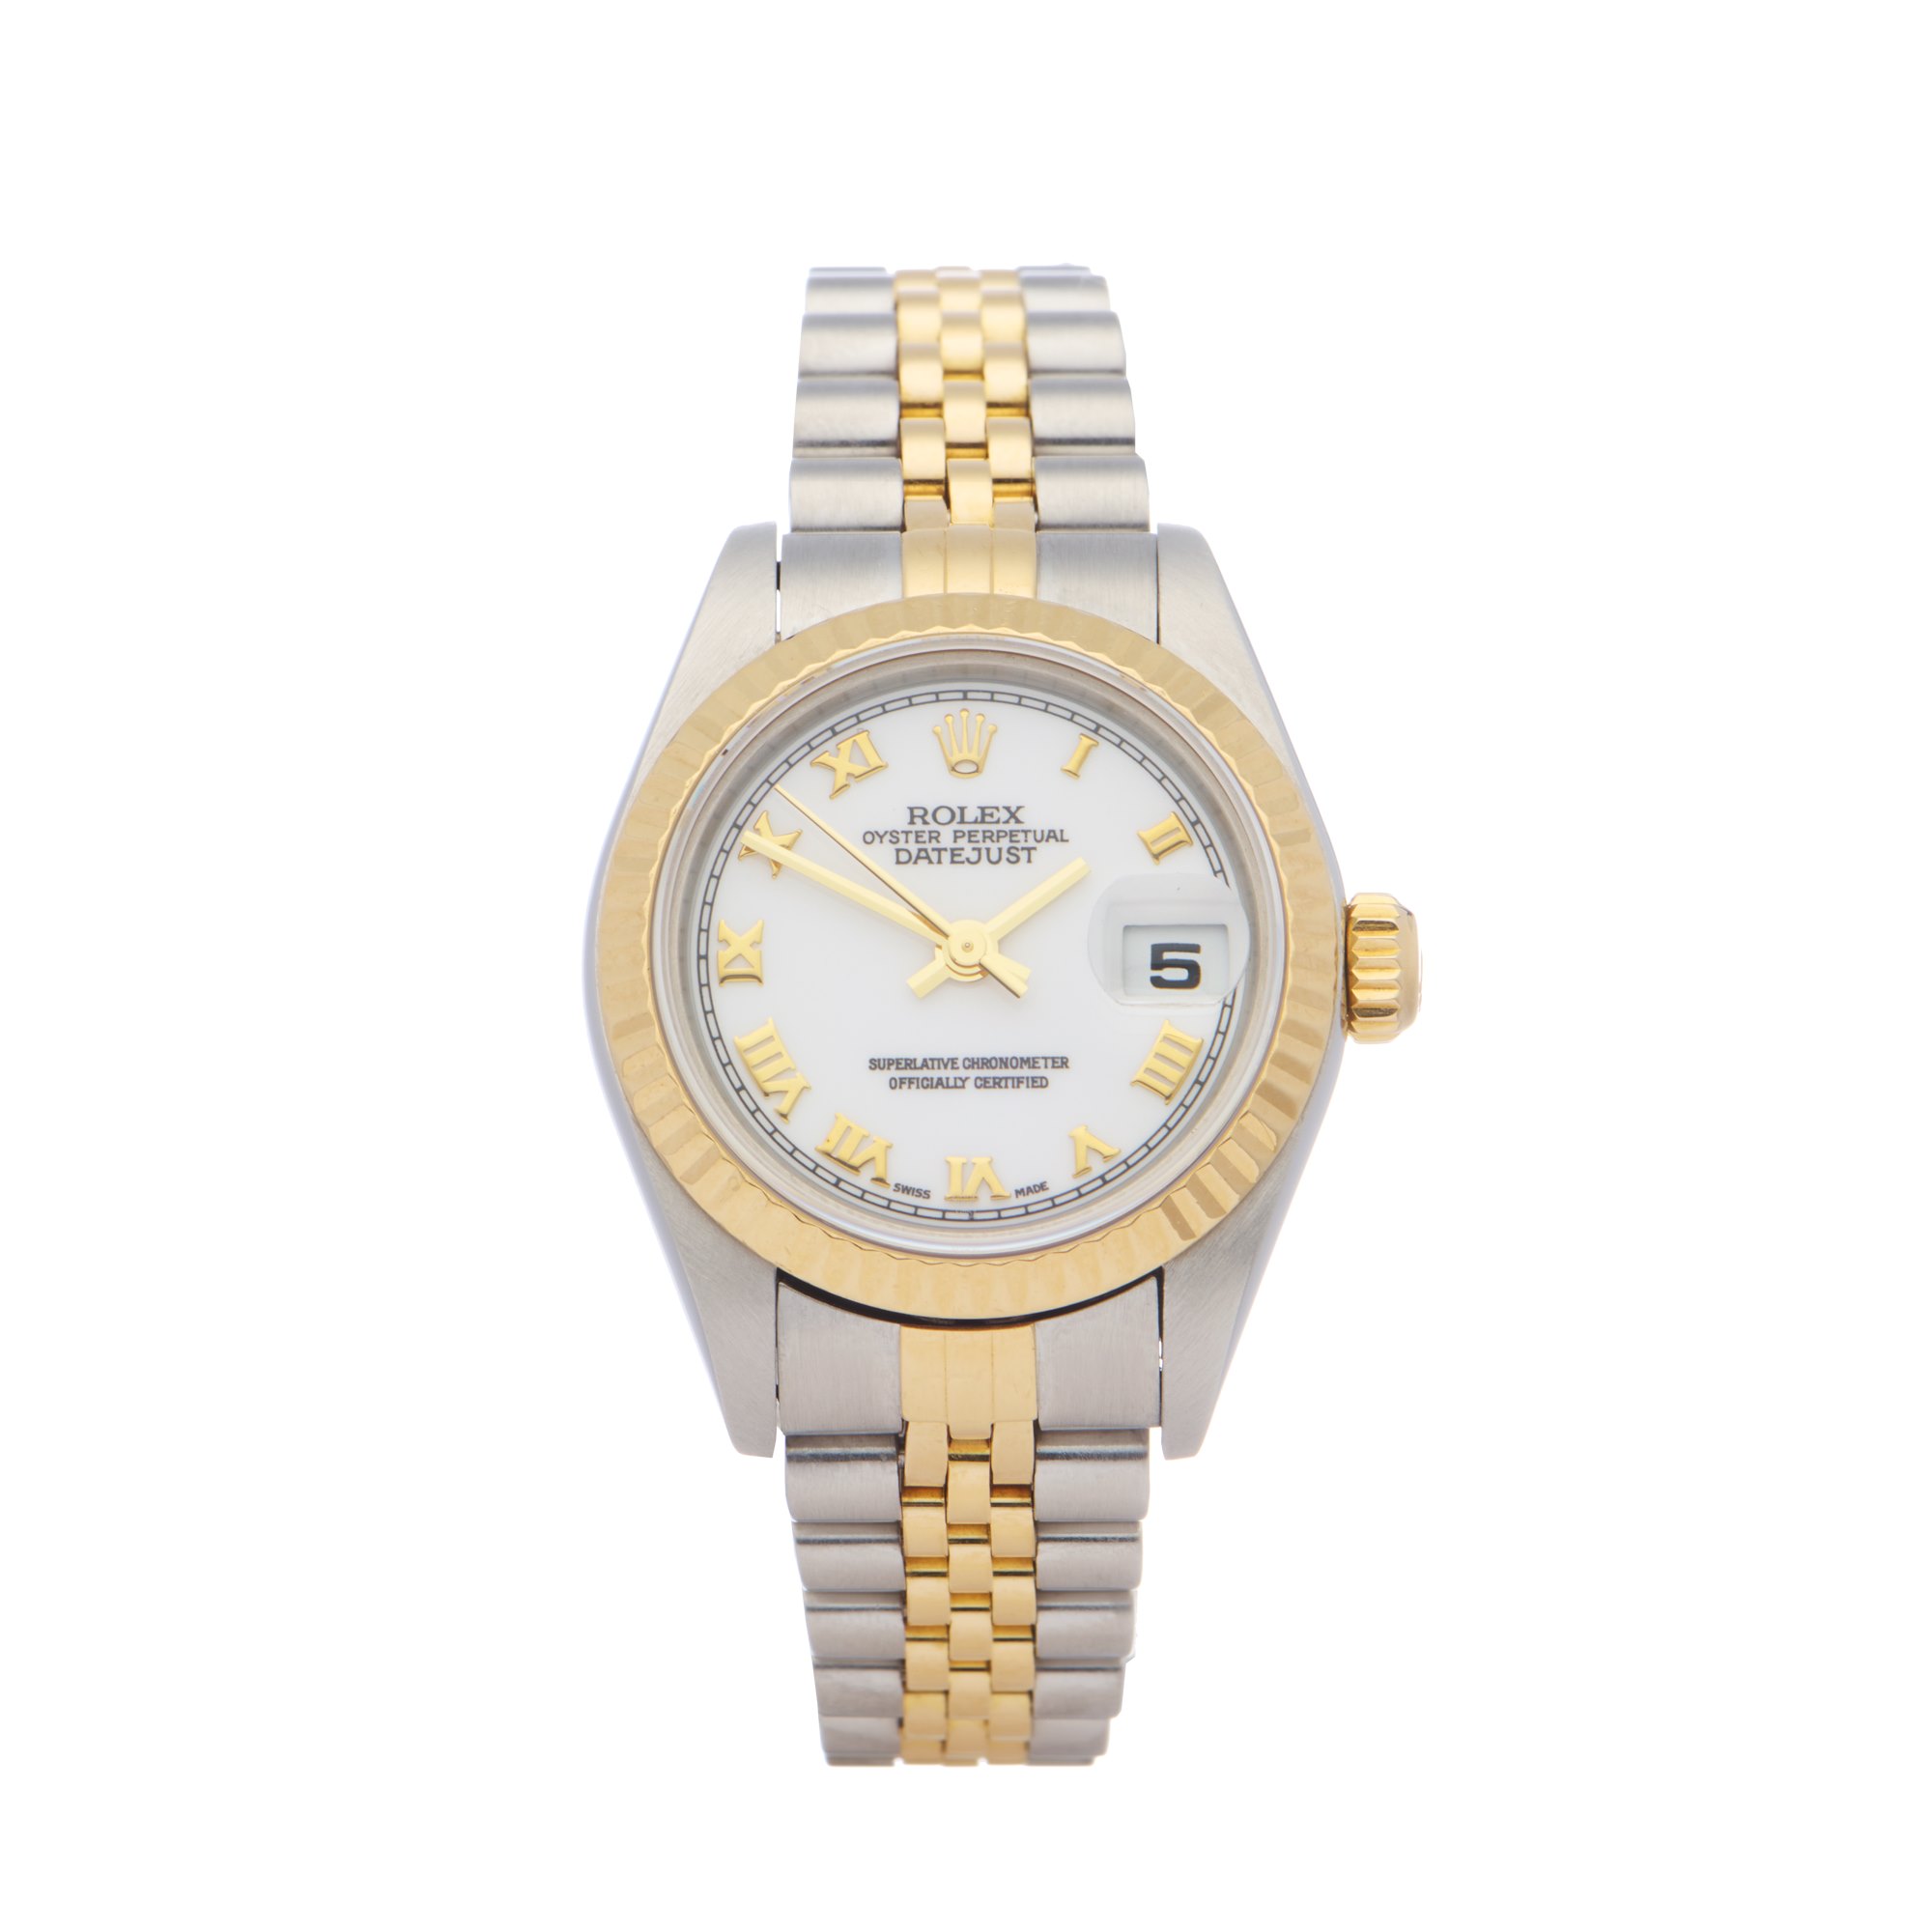 Rolex Datejust 26 18K Yellow Gold & Stainless Steel 79173